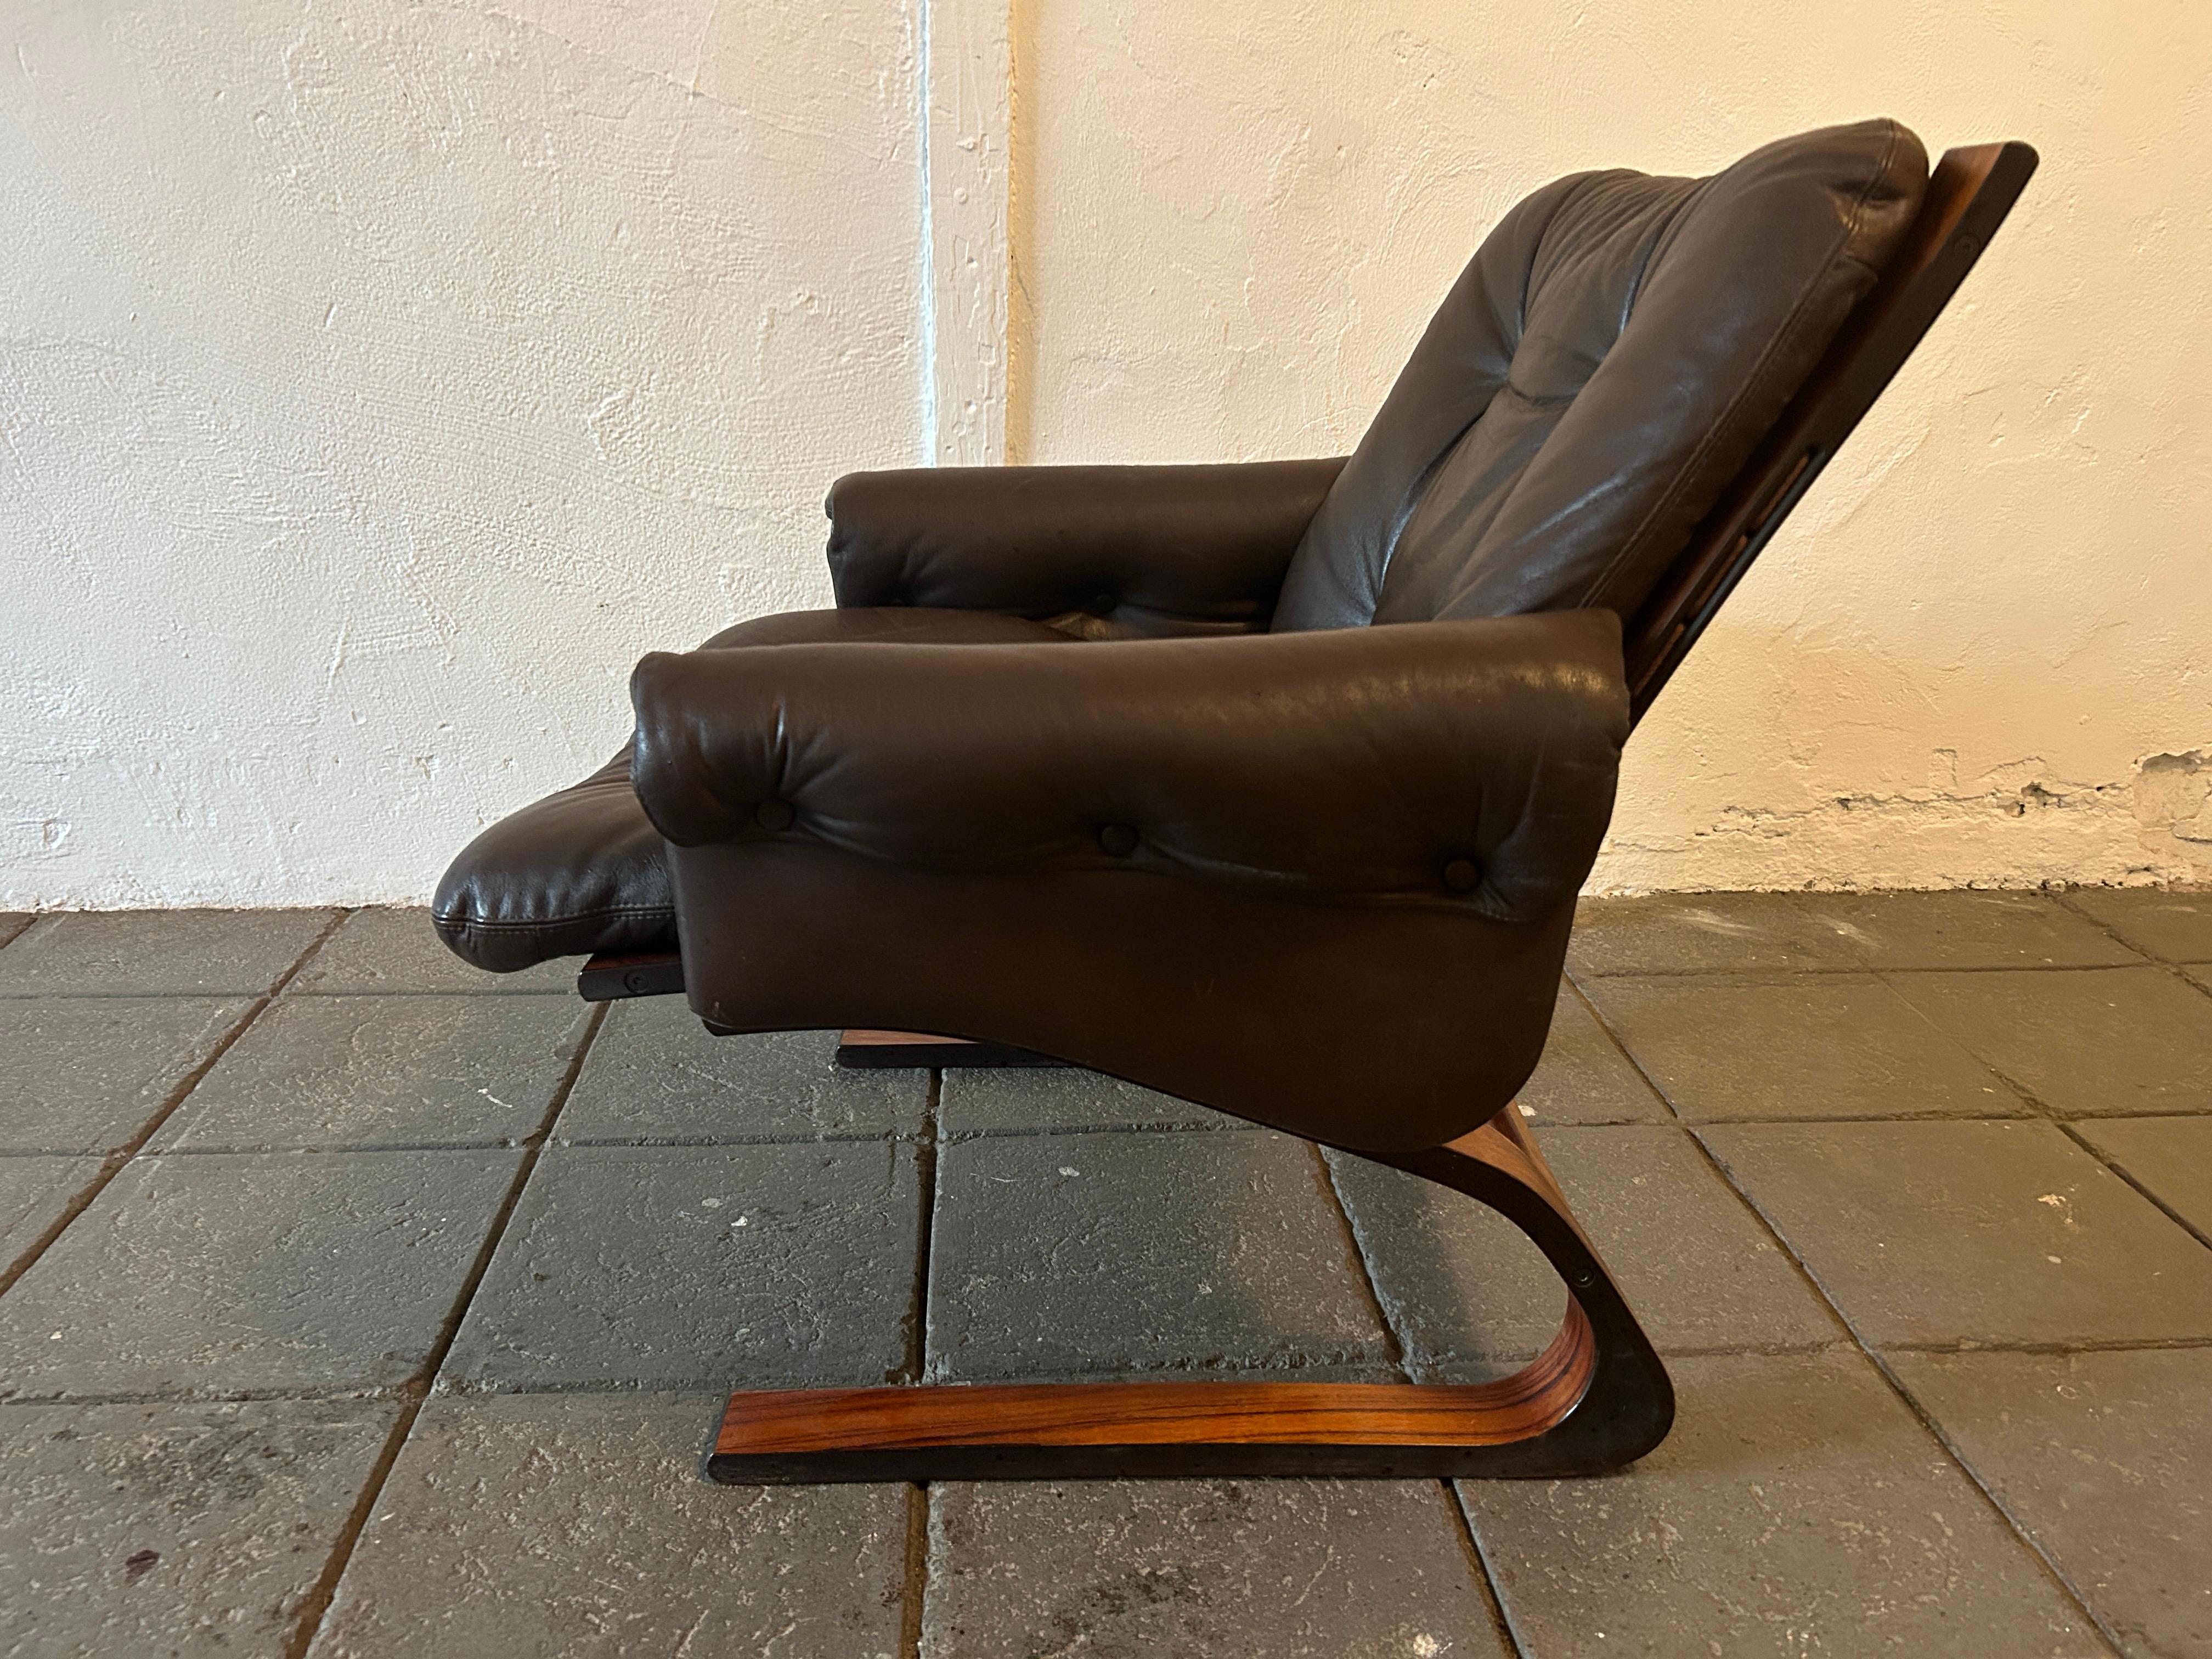 Comfortable Elsa and Nordahl Solheim for Rykken Kengu Scandinavian modern lounge chair with bent rosewood frame and leather upholstery. 

Measures 29in tall x 30in wide x 29in deep. 

Seat height: 14”.